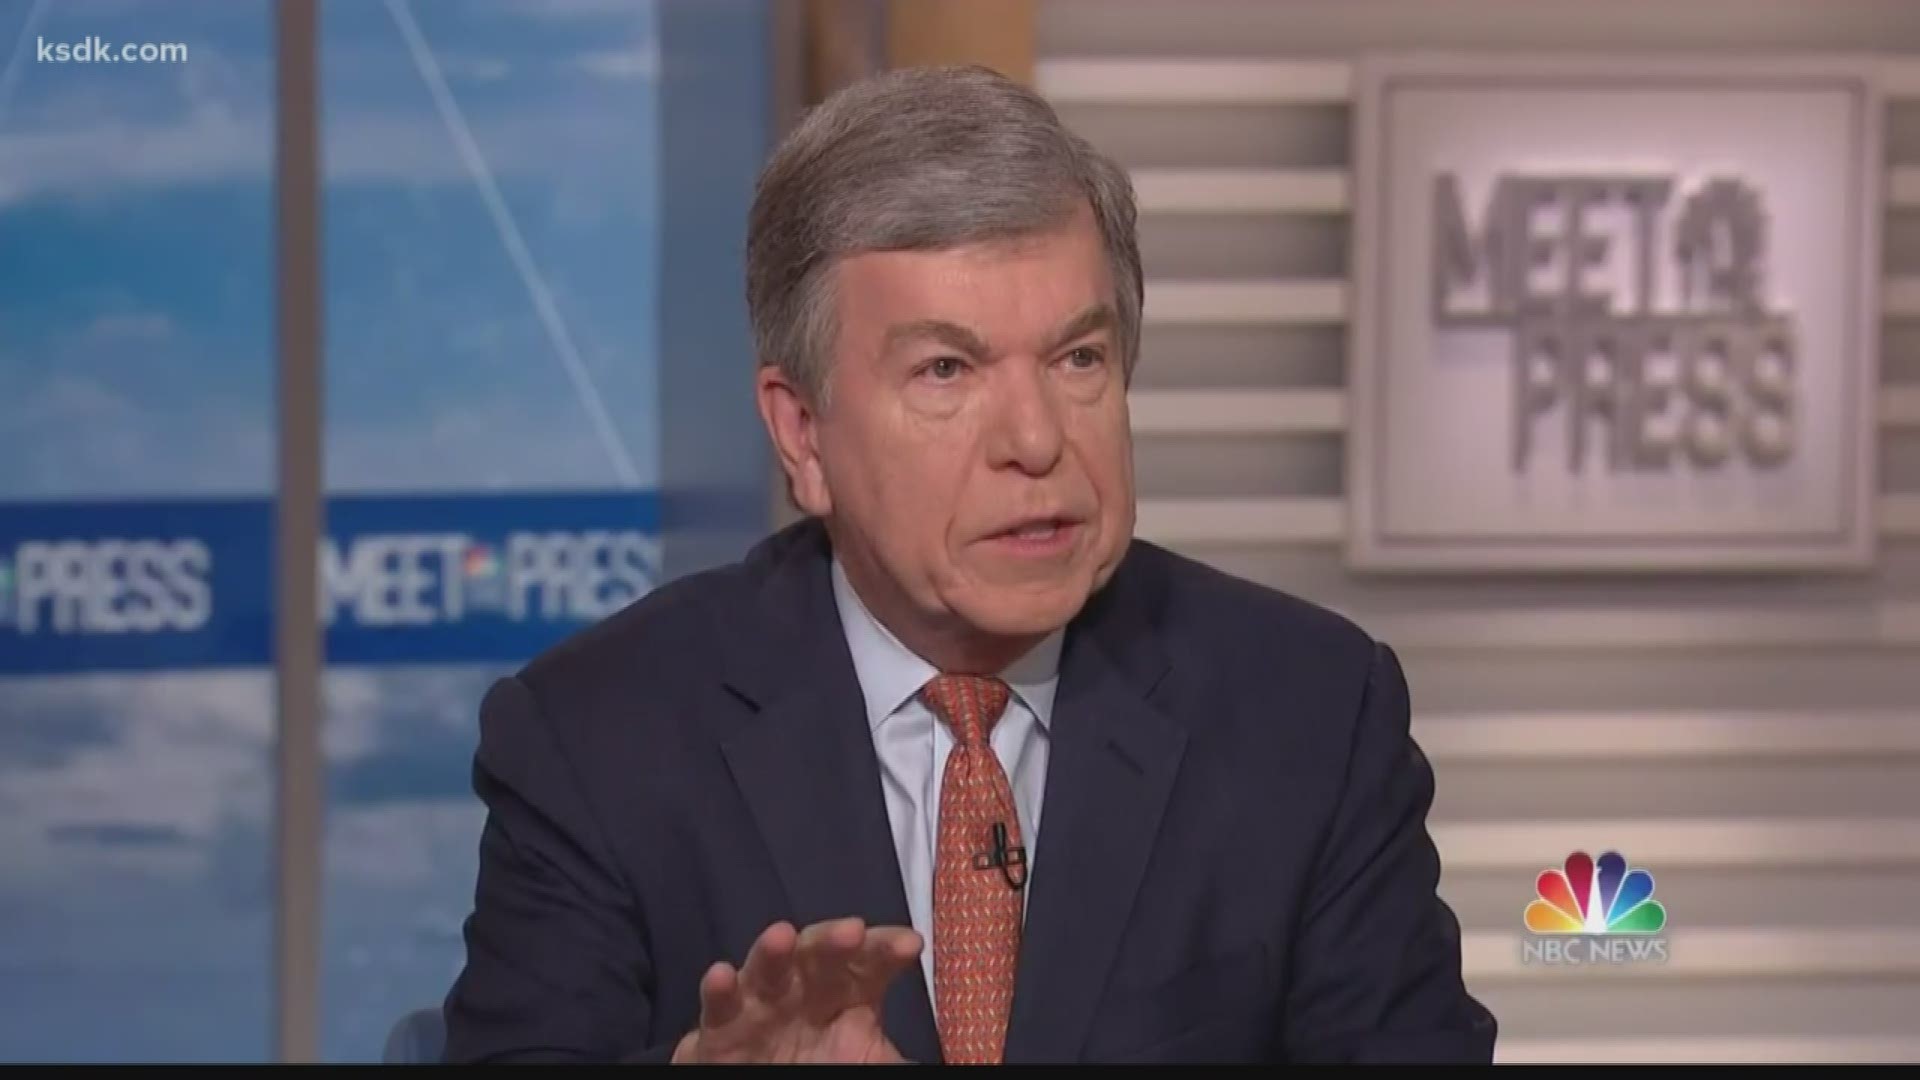 Before moving forward on any legislation related to guns, U.S. Senator Roy Blunt said President Trump needs to set some guidelines for what he’ll sign. The Republican senator for Missouri was on NBC’s Meet the Press Sunday morning discussing ways to address gun violence in America.